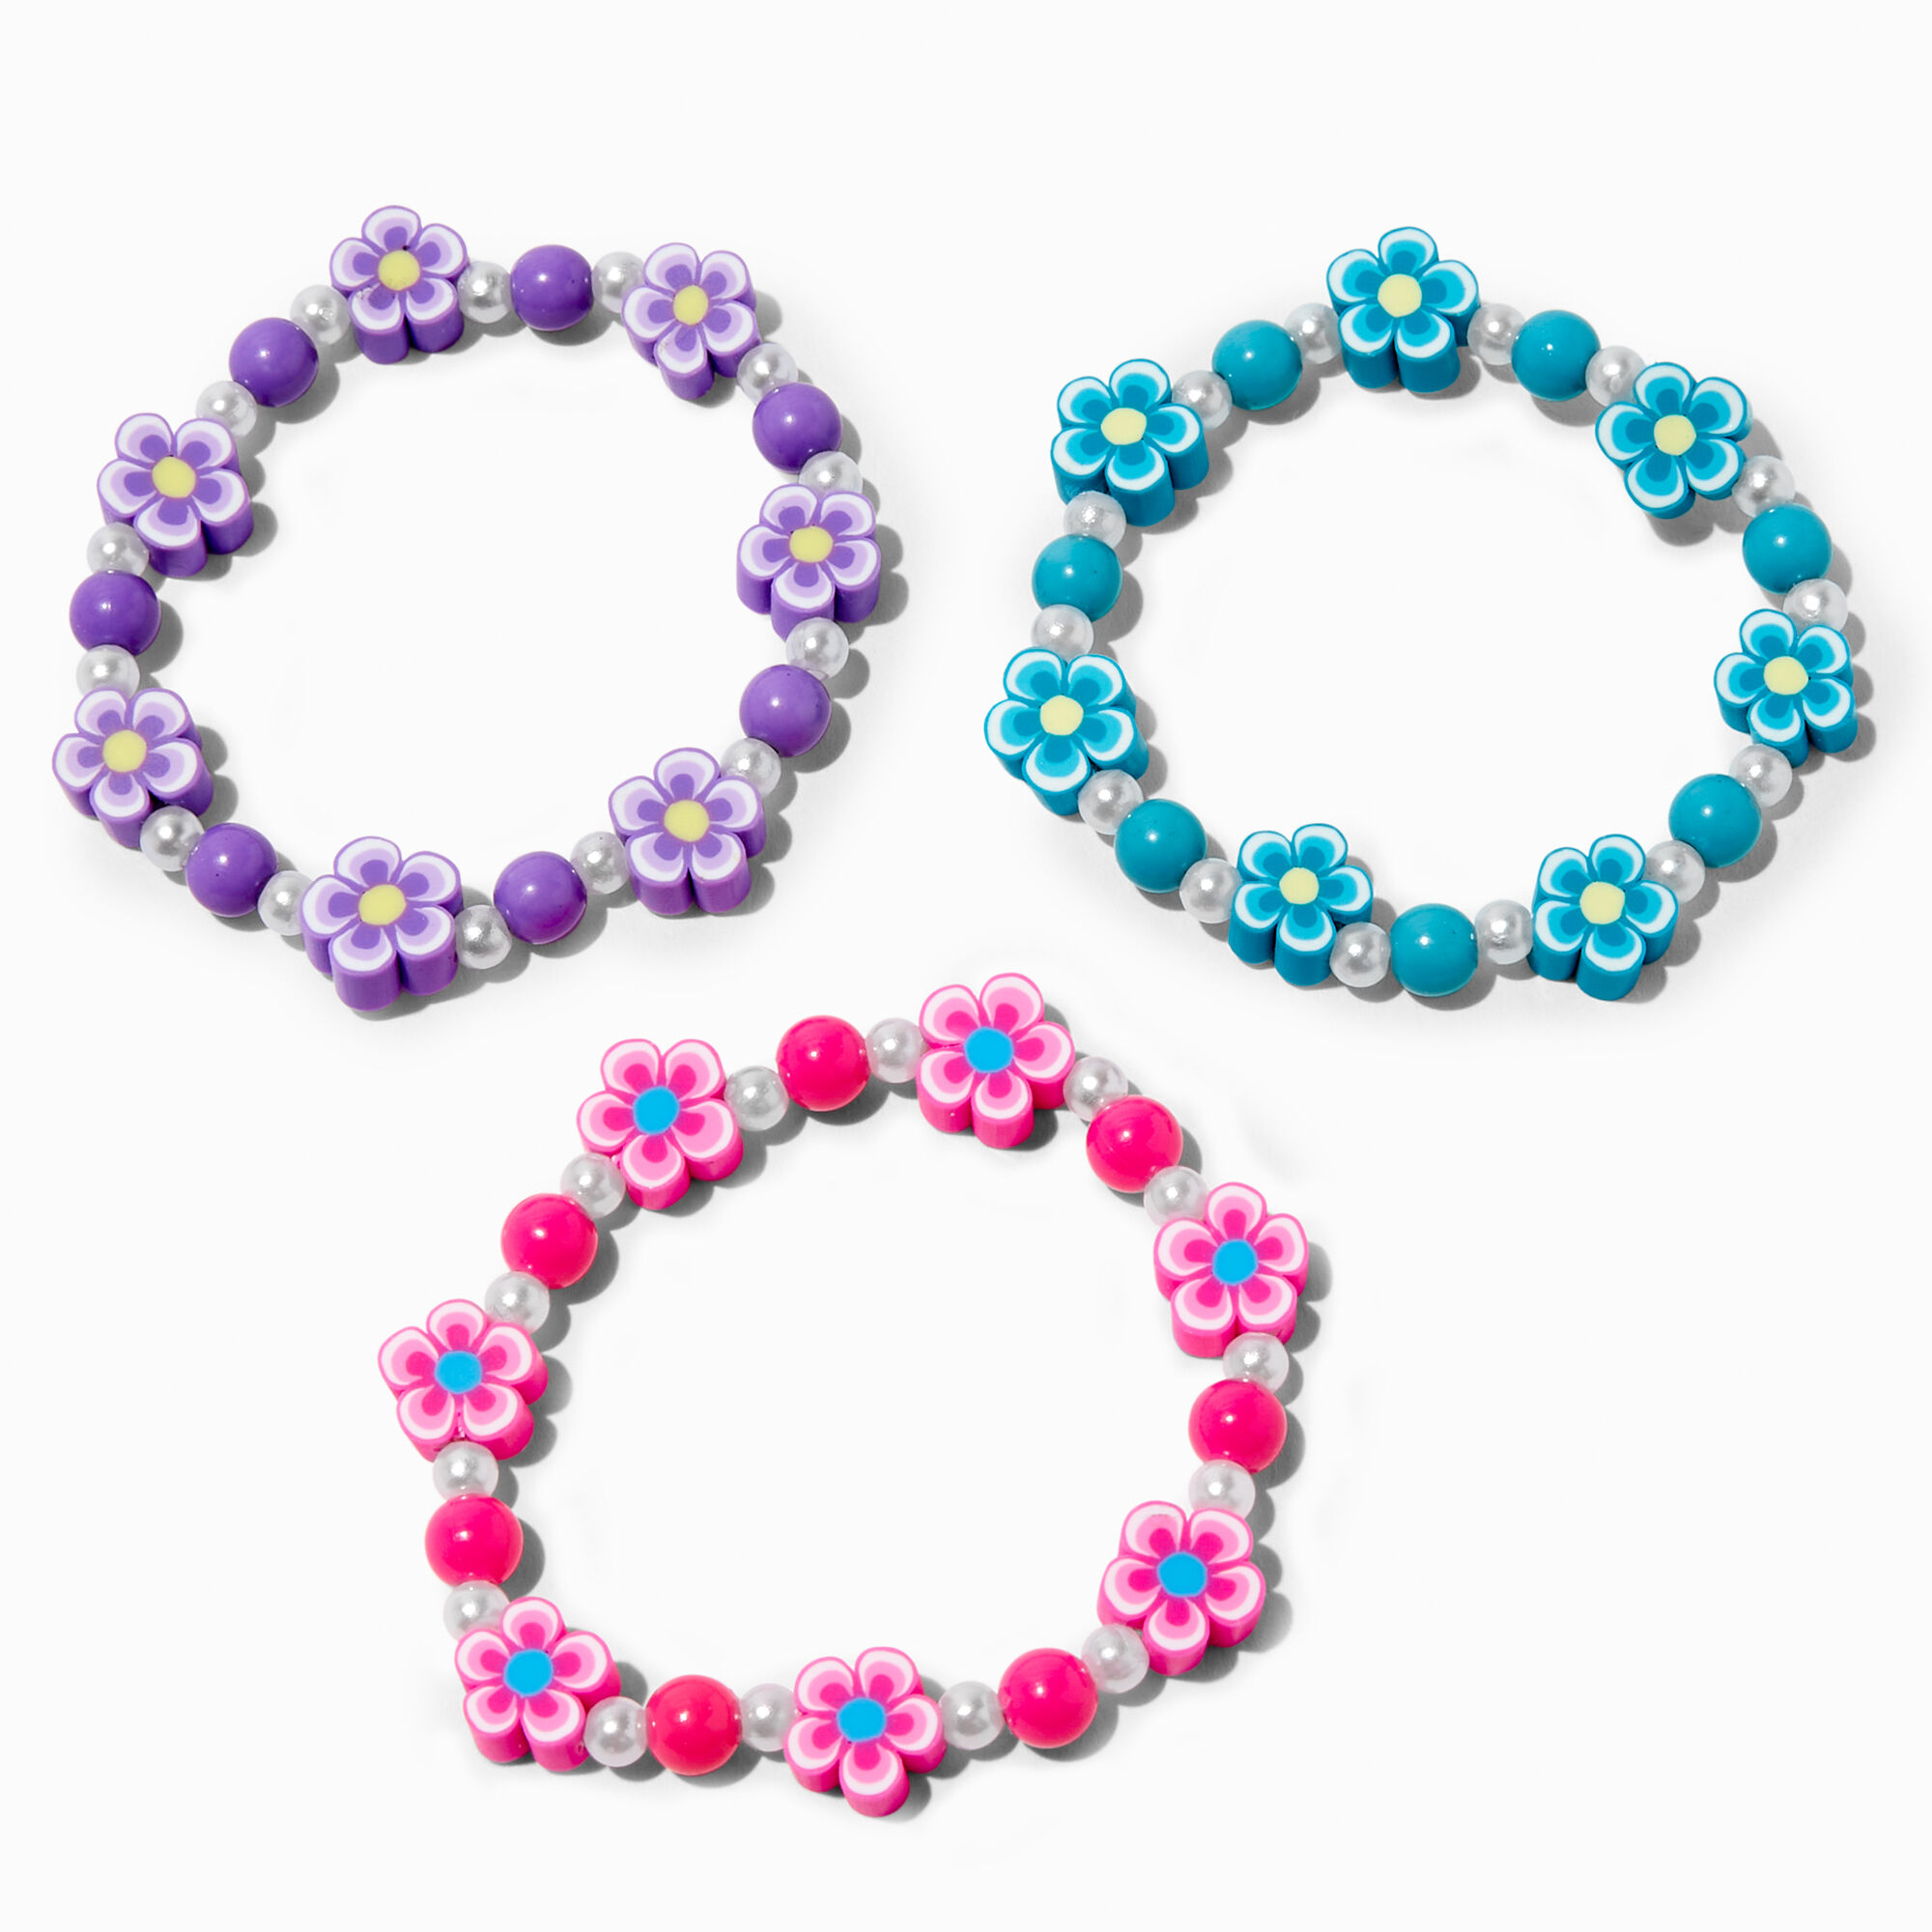 View Claires Club Fimo Clay Flower Bead Stretch Bracelets 3 Pack Rainbow information